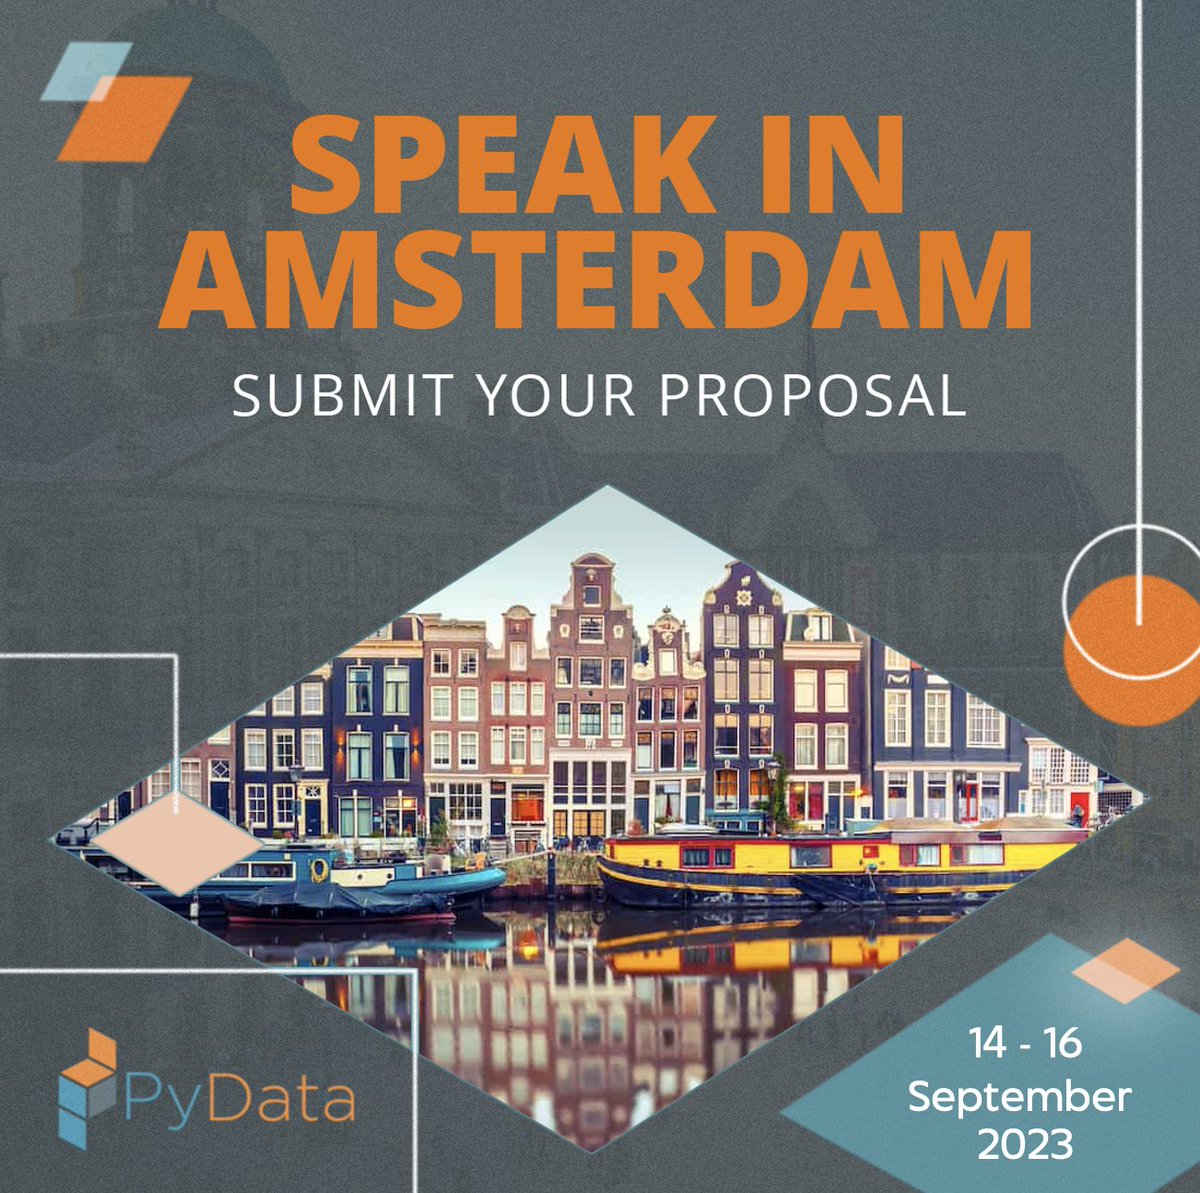 🚨‼️ PYDATA AMSTERDAM ANNOUNCEMENT ‼️🚨

By popular demand, the #PyData Amsterdam 2023 Call For Proposals deadline has been EXTENDED to June 18!! Don't miss this opportunity to share your insights with the community!

Submit your proposal here: ow.ly/gQle50OJwPe